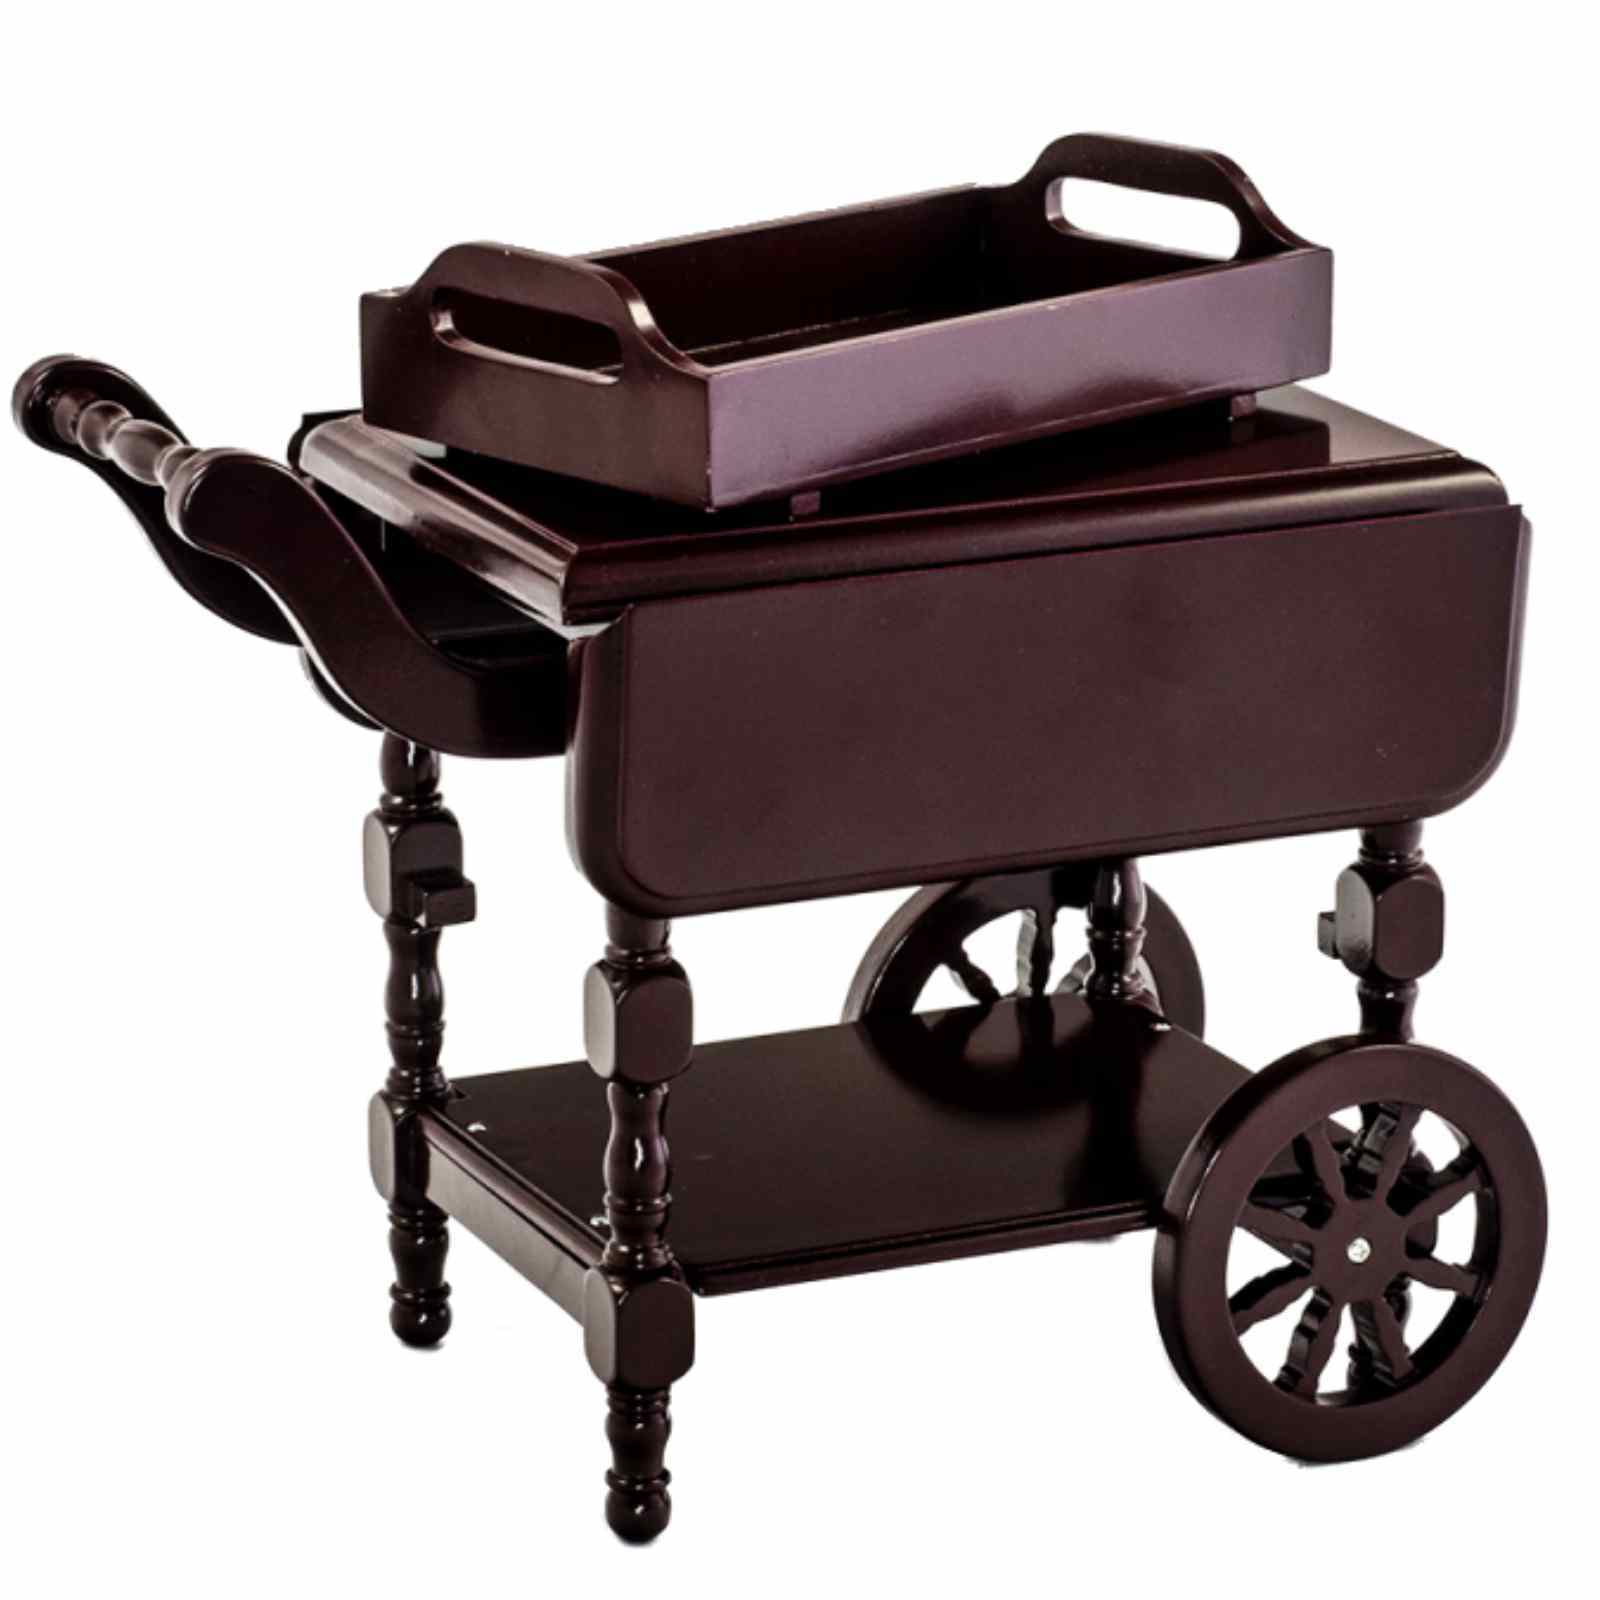 The Queen's Treasures Tea Cart for 18-inch Dolls and 18-inch Doll Furniture